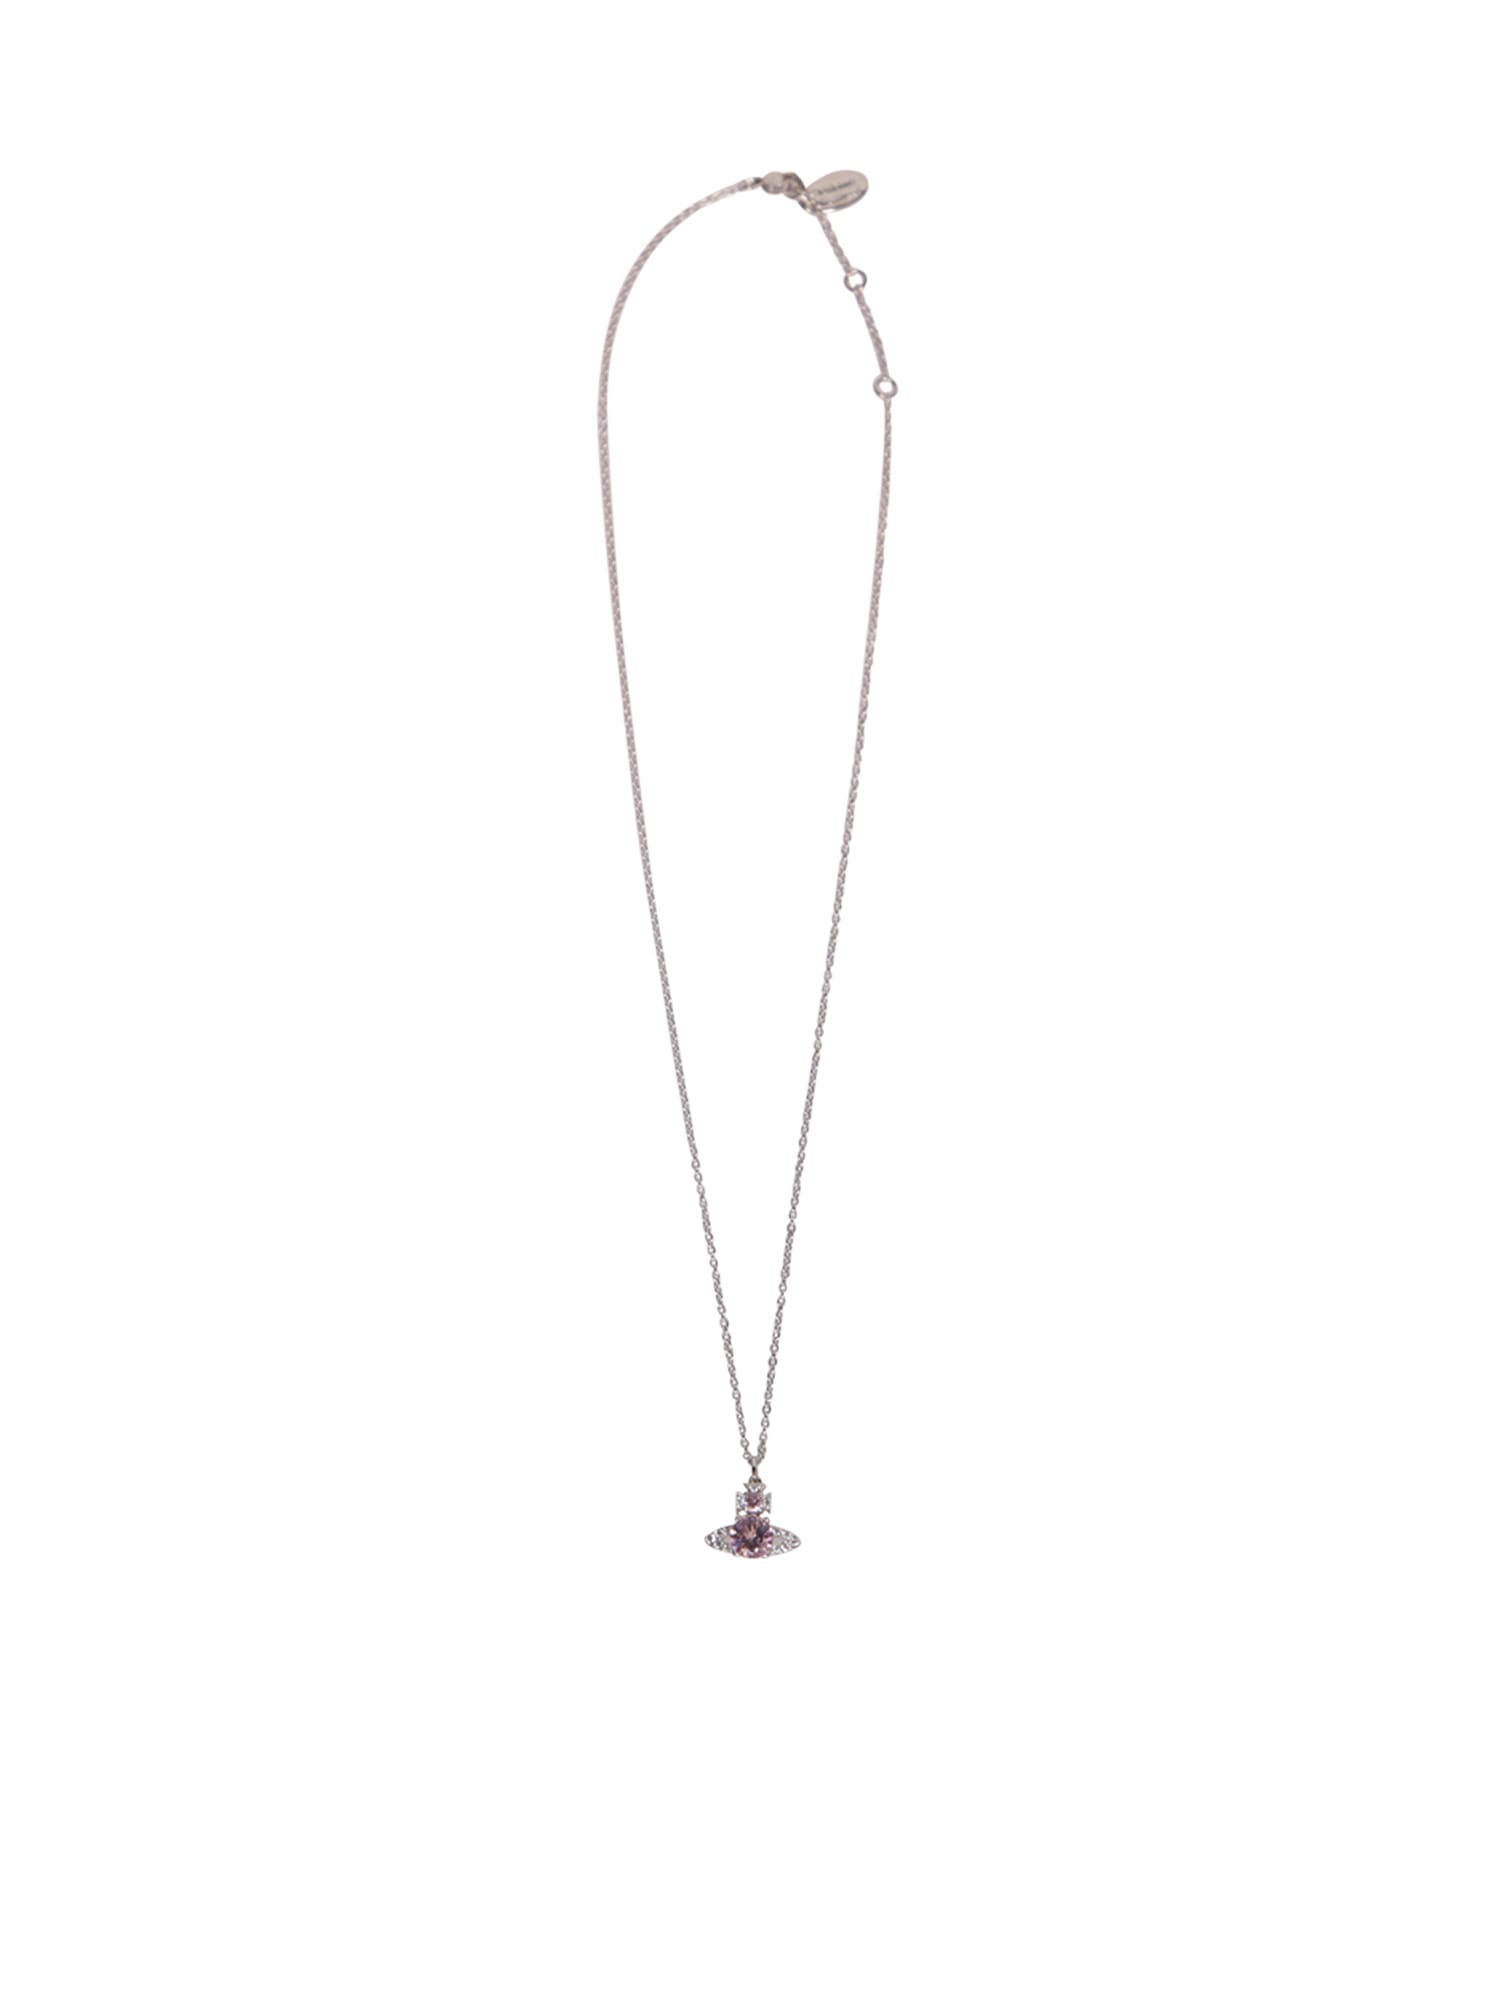 Vivienne Westwood Ismene Necklace | Pink Gold – Maudes The Jewellers